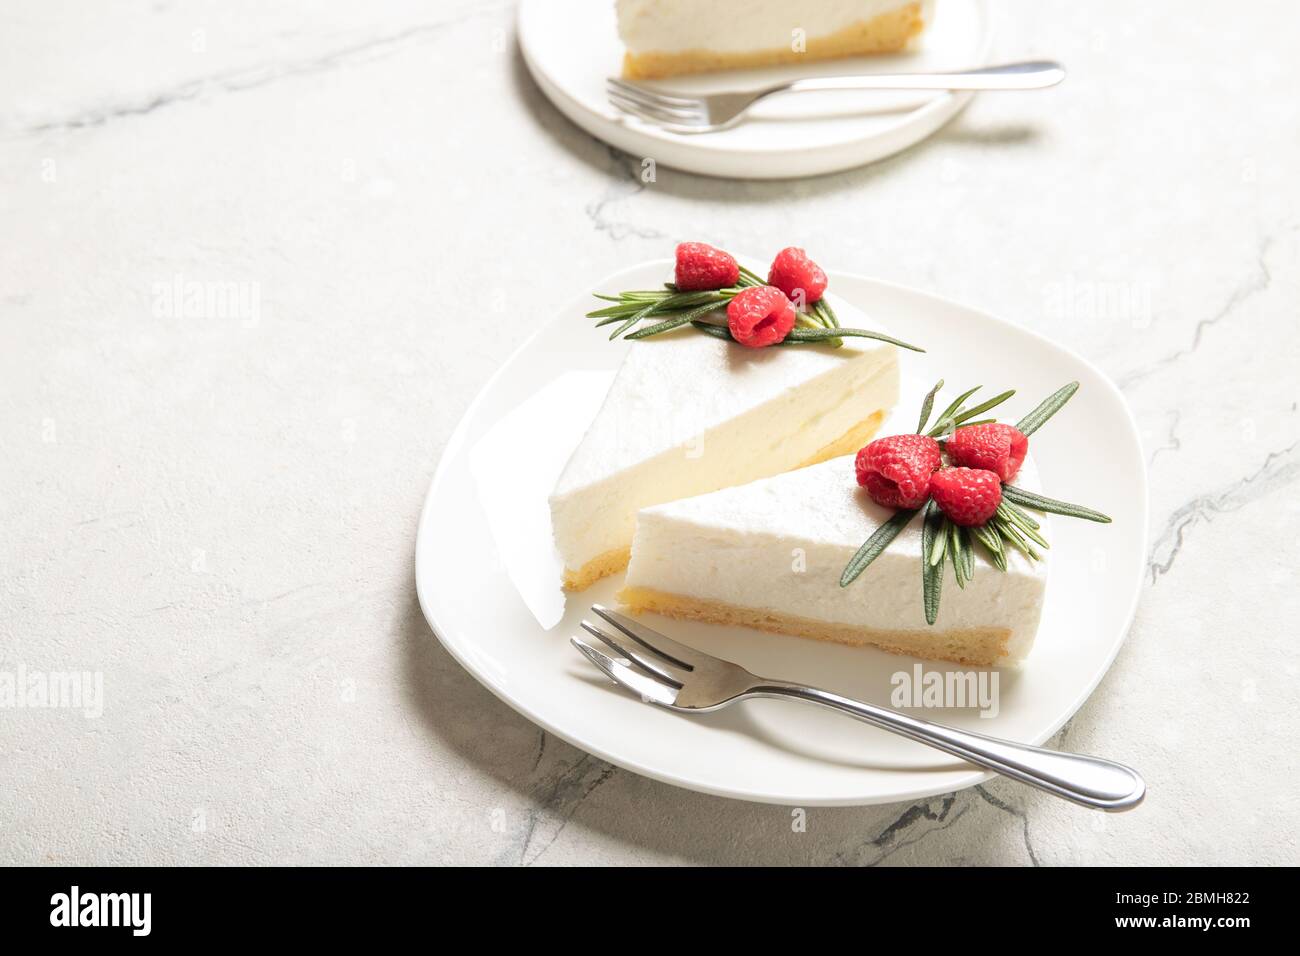 Plate with delicious raspberry cheesecake. On a wooden background Stock Photo